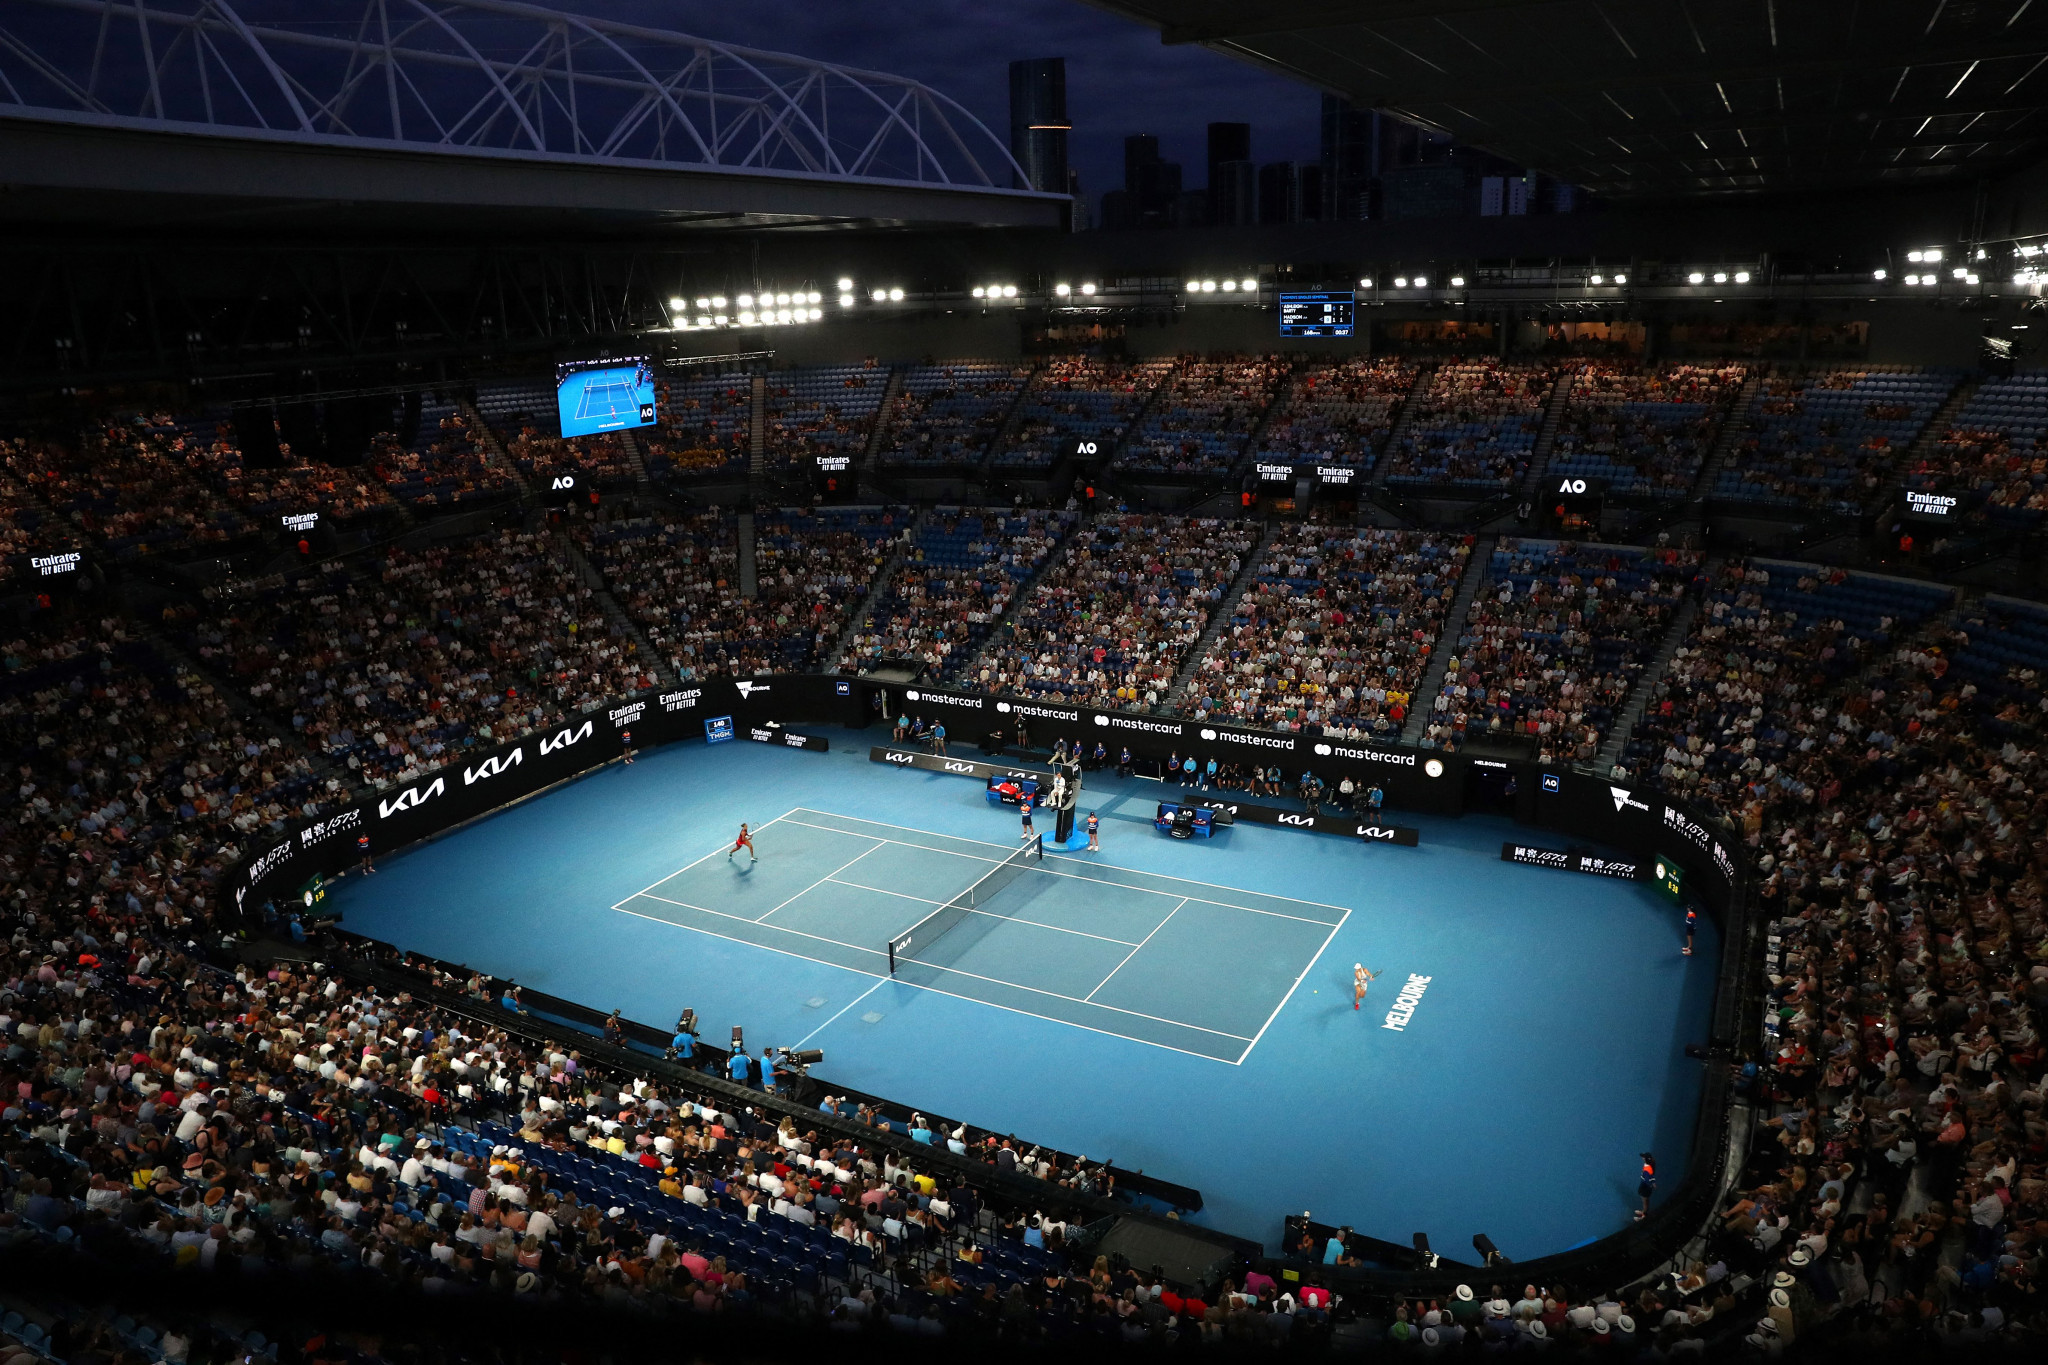 Both women's singles semi-finals were held on the main Rod Laver Arena ©Getty Images